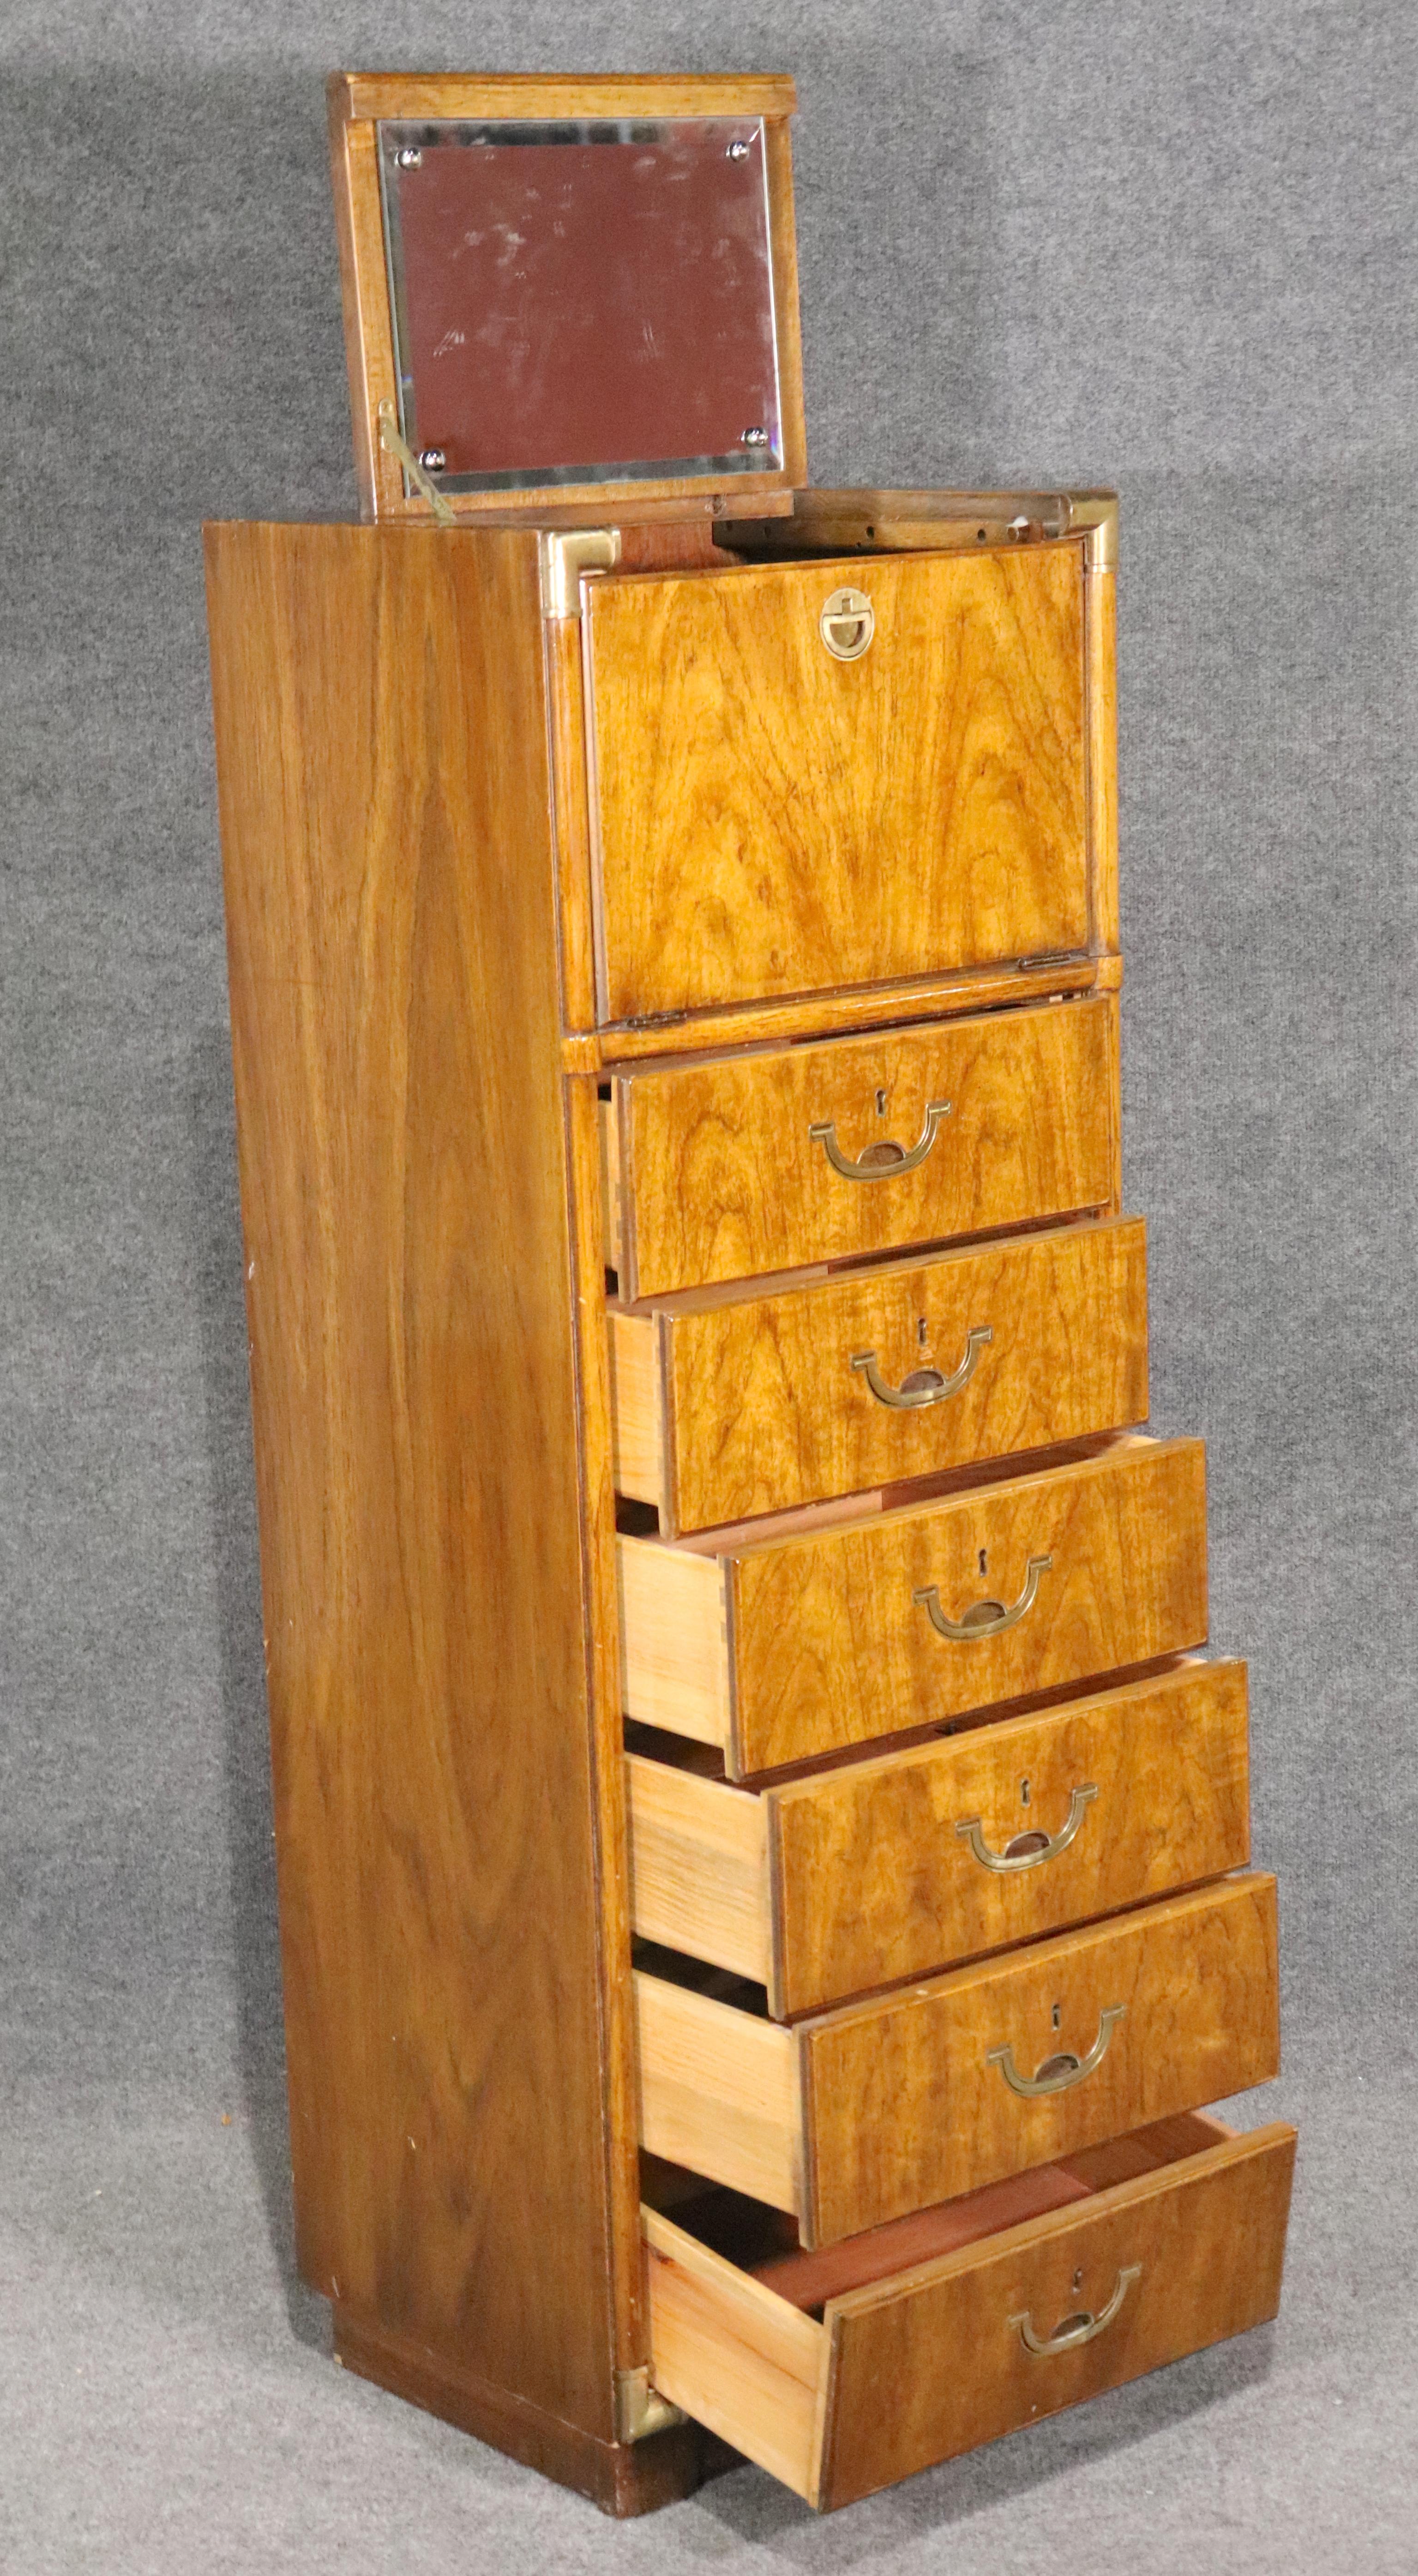 Mid-Century Modern tall chest of drawers with hidden mirror. Designed by Drexel for their Accolade II series. This is a lingerie chest and vanity in one!
Please confirm location.
 